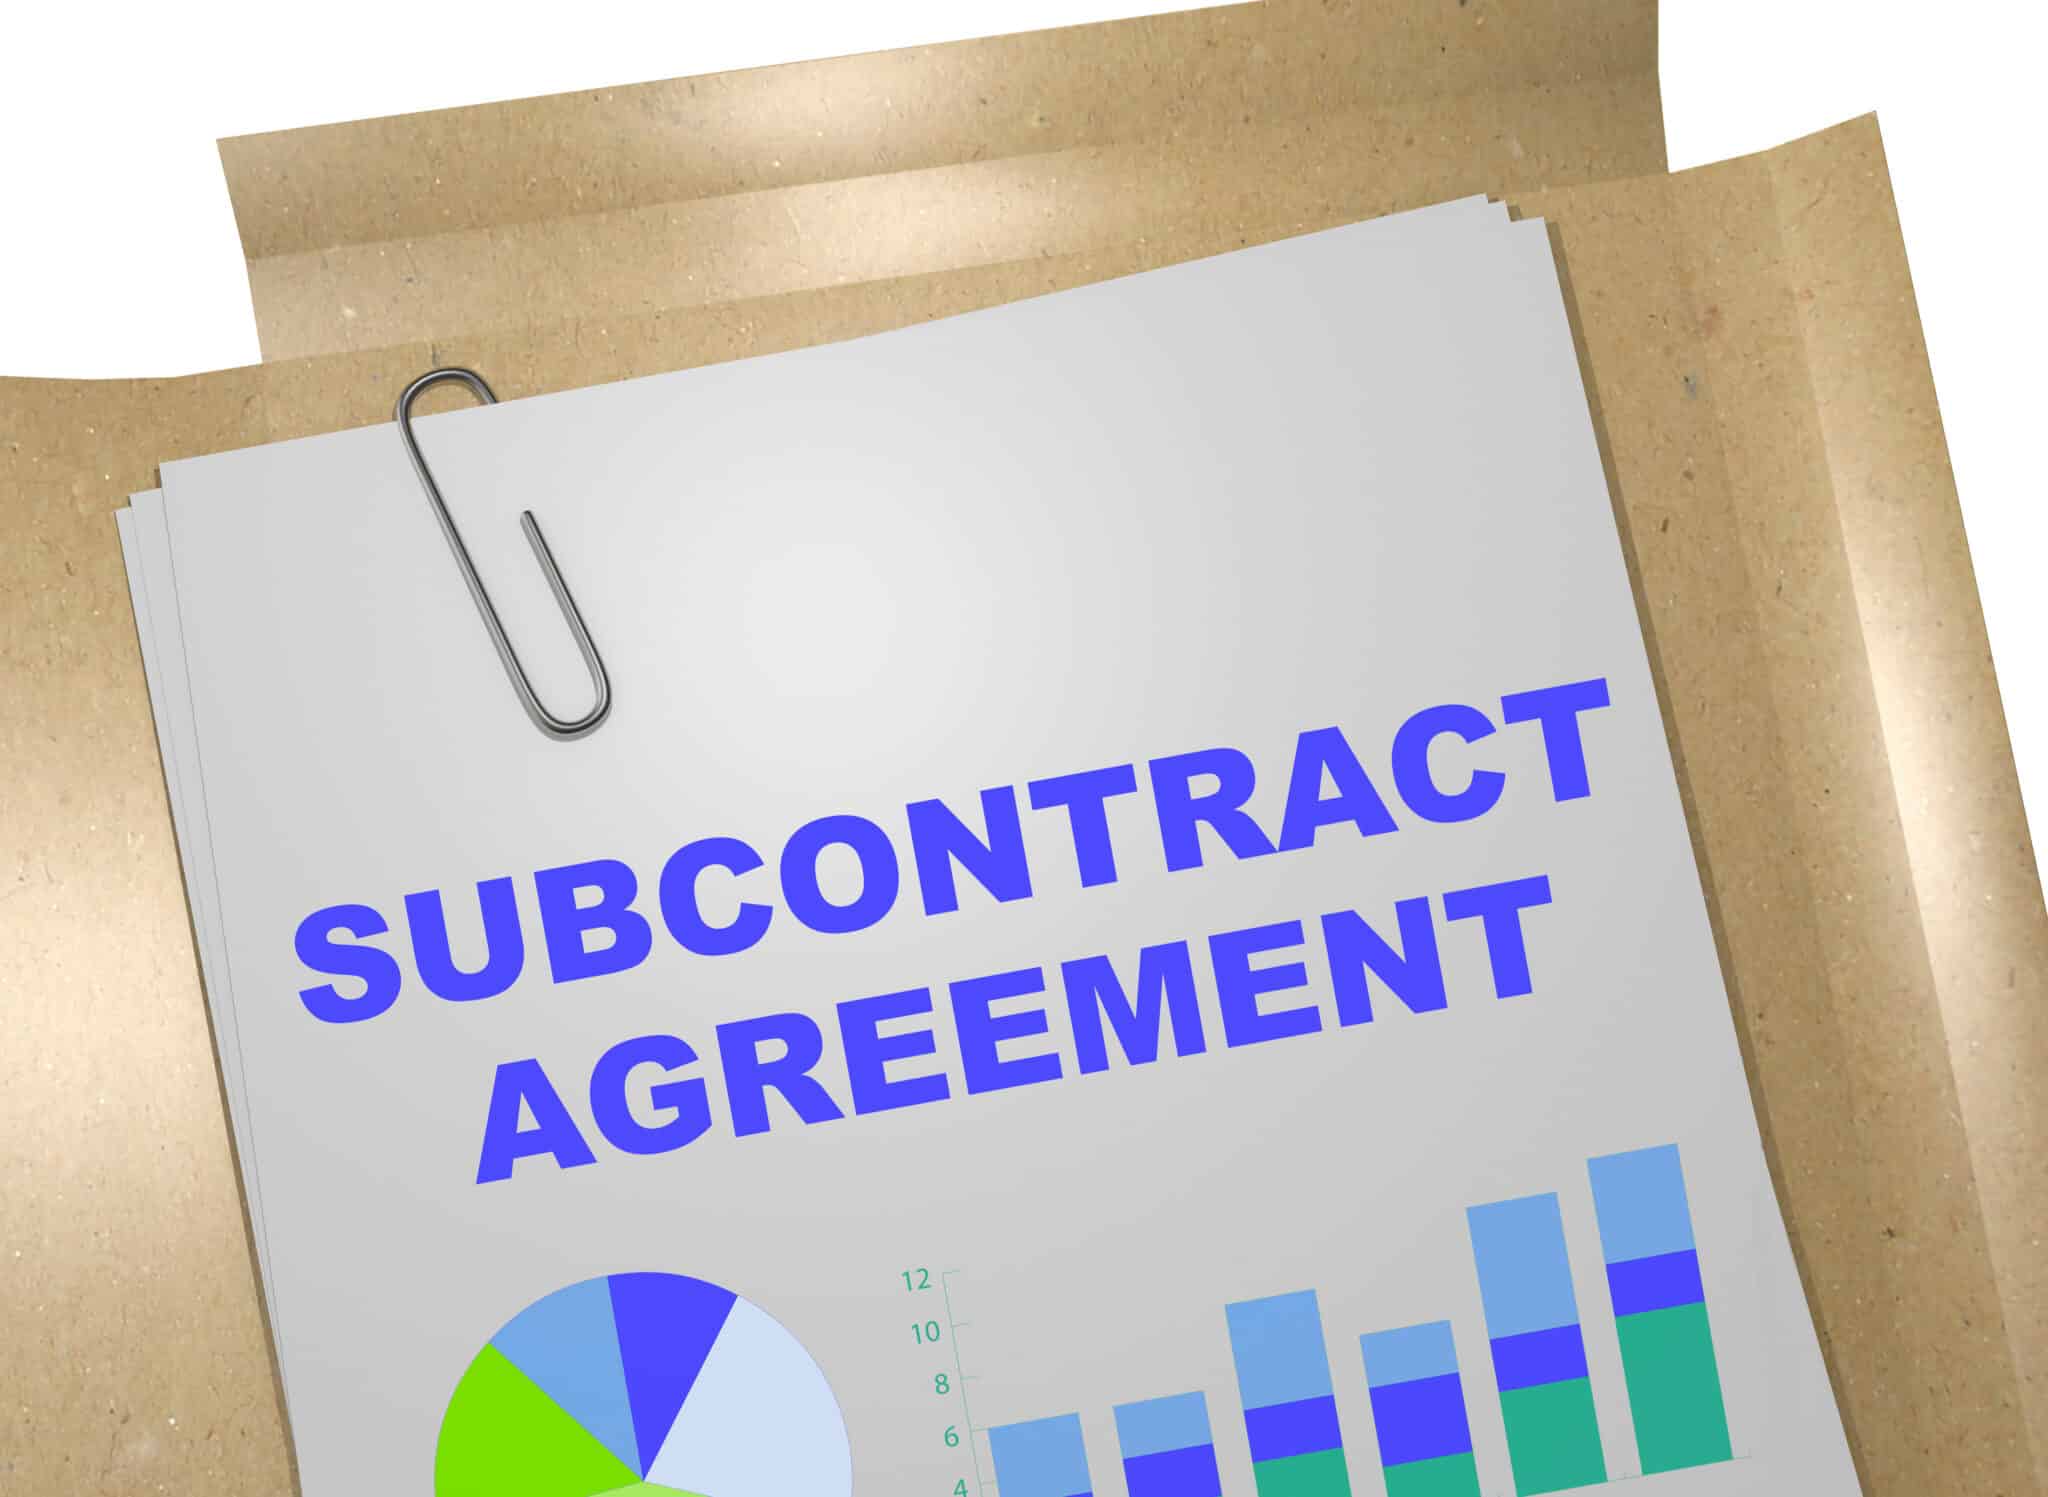 Subcontract Agreement in folder, symbolizing ethical business deals in transcription subcontracting